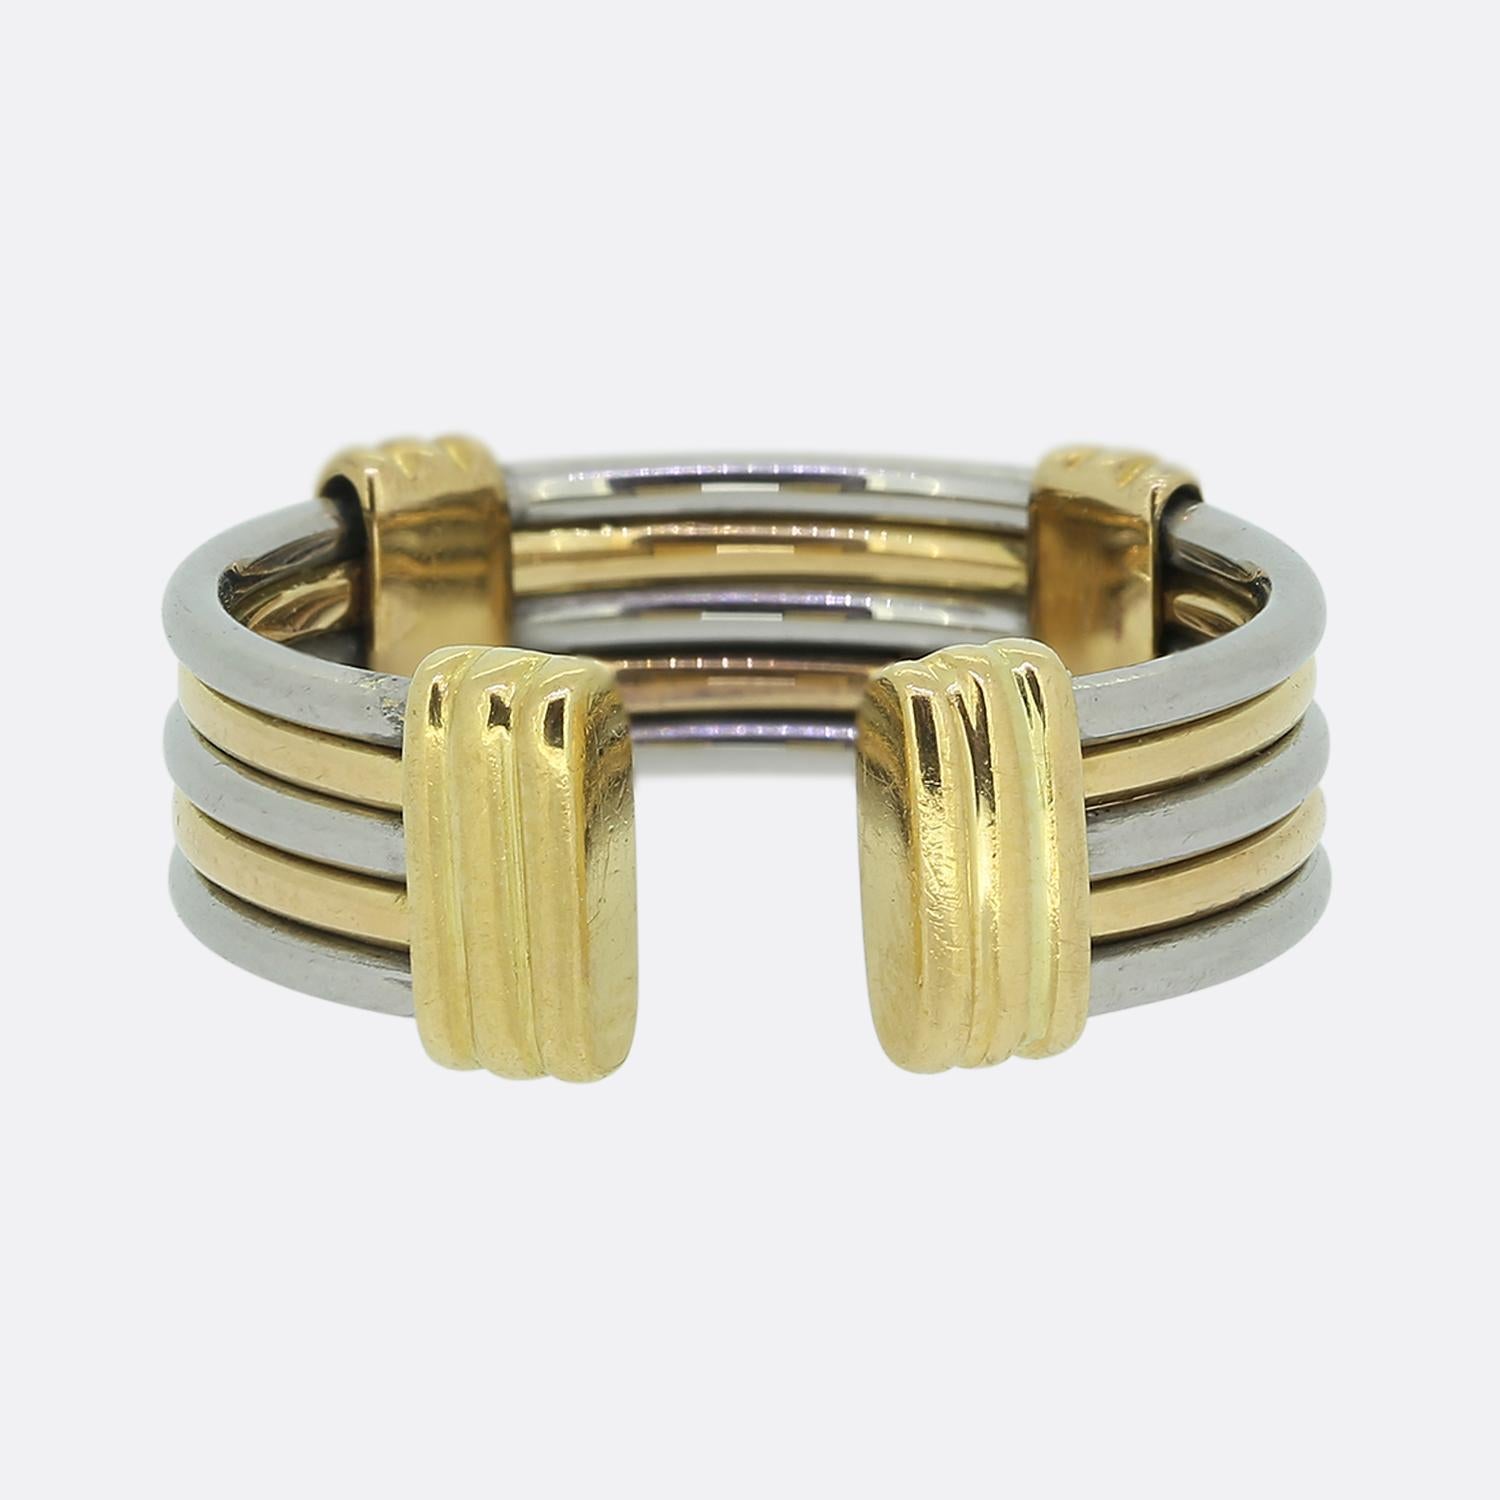 Here we have a truly wonderful vintage suite from the luxury jewellery designer Cartier. The suite dates back to the 1990s and is crafted in 18ct yellow gold and stainless steel. The suite is composed of a bangle, a pair of earrings and a ring. The